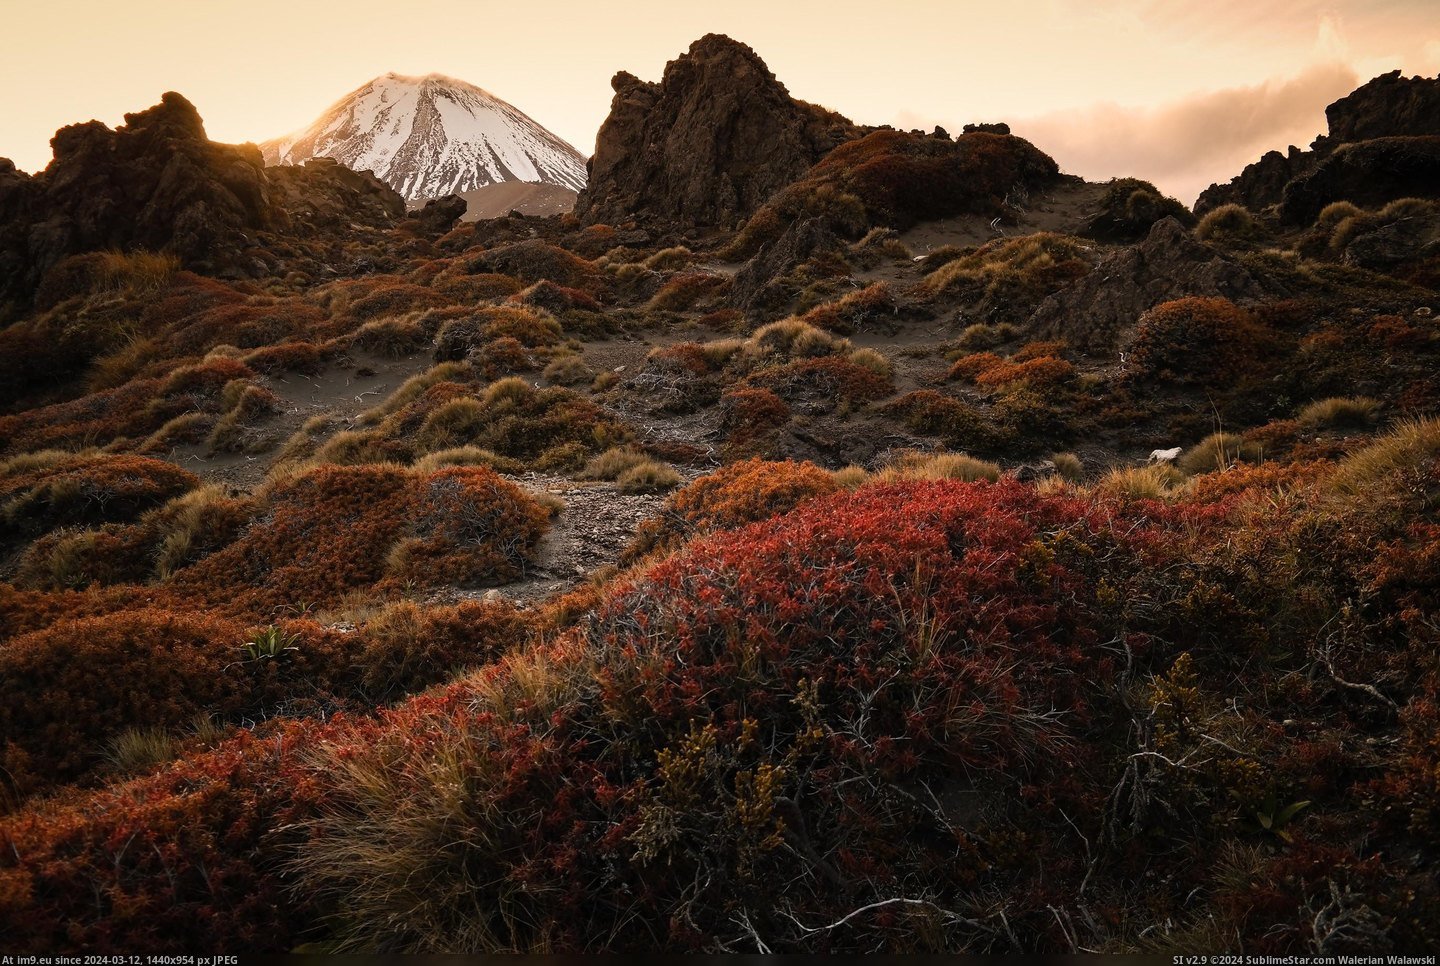 #Sun #Mount #Track #Dipping #Tongariro #Zealand #Northern [Earthporn] Probably need more New Zealand here. The sun dipping behind Mount Ngauruhoe from Oturere track, Tongariro Northern C Pic. (Изображение из альбом My r/EARTHPORN favs))